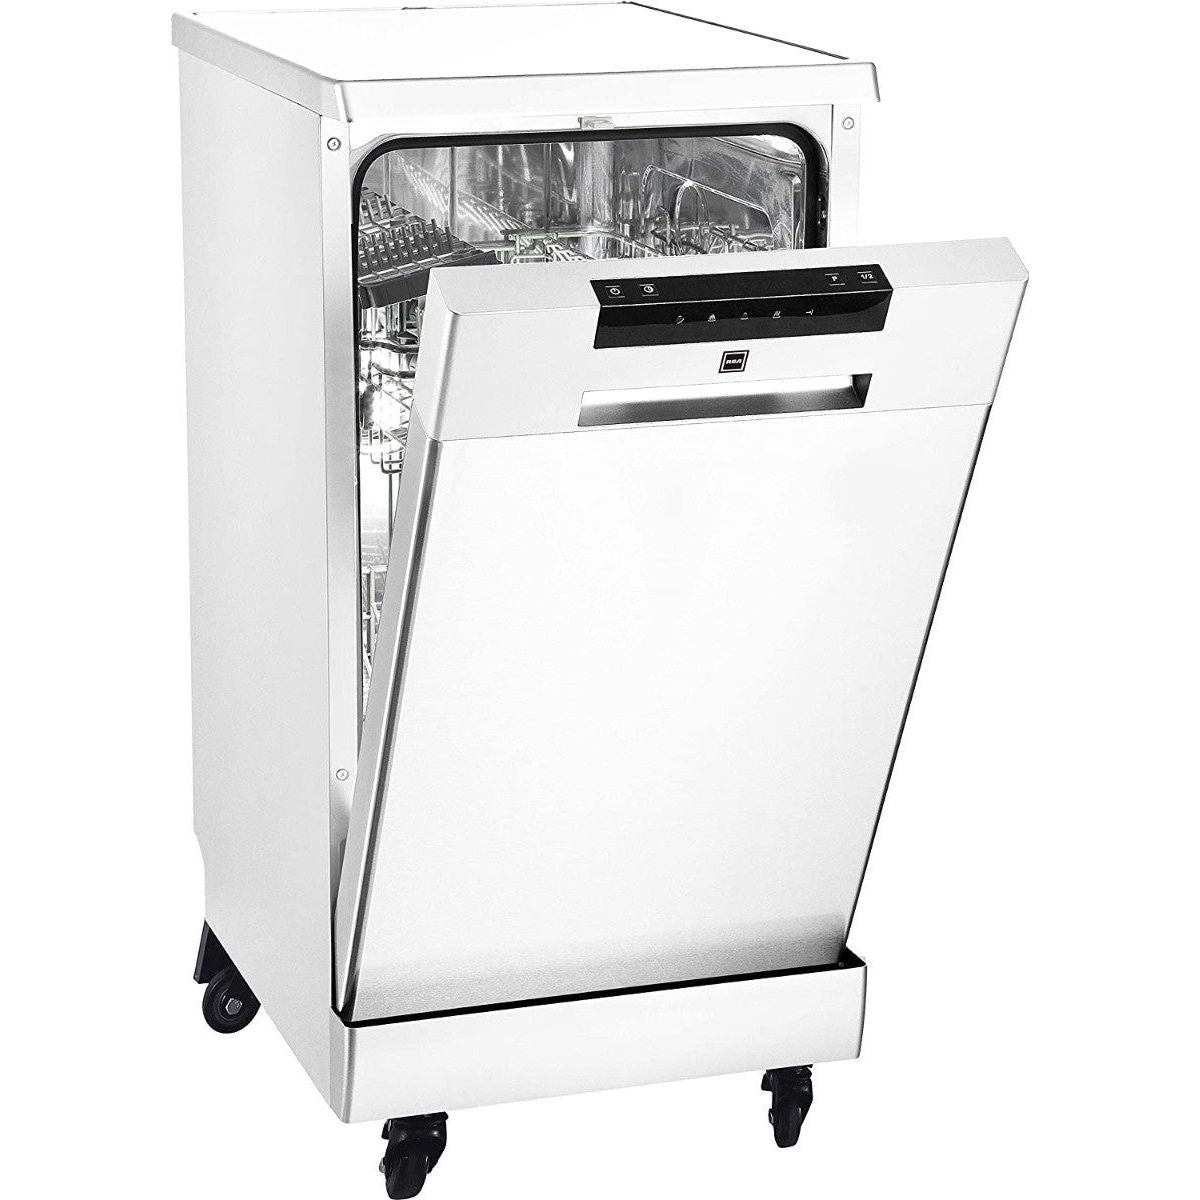 RCA18 in. White Electronic Portable 120-volt Dishwasher 3-Cycles - 8 Place Settings RDW1809